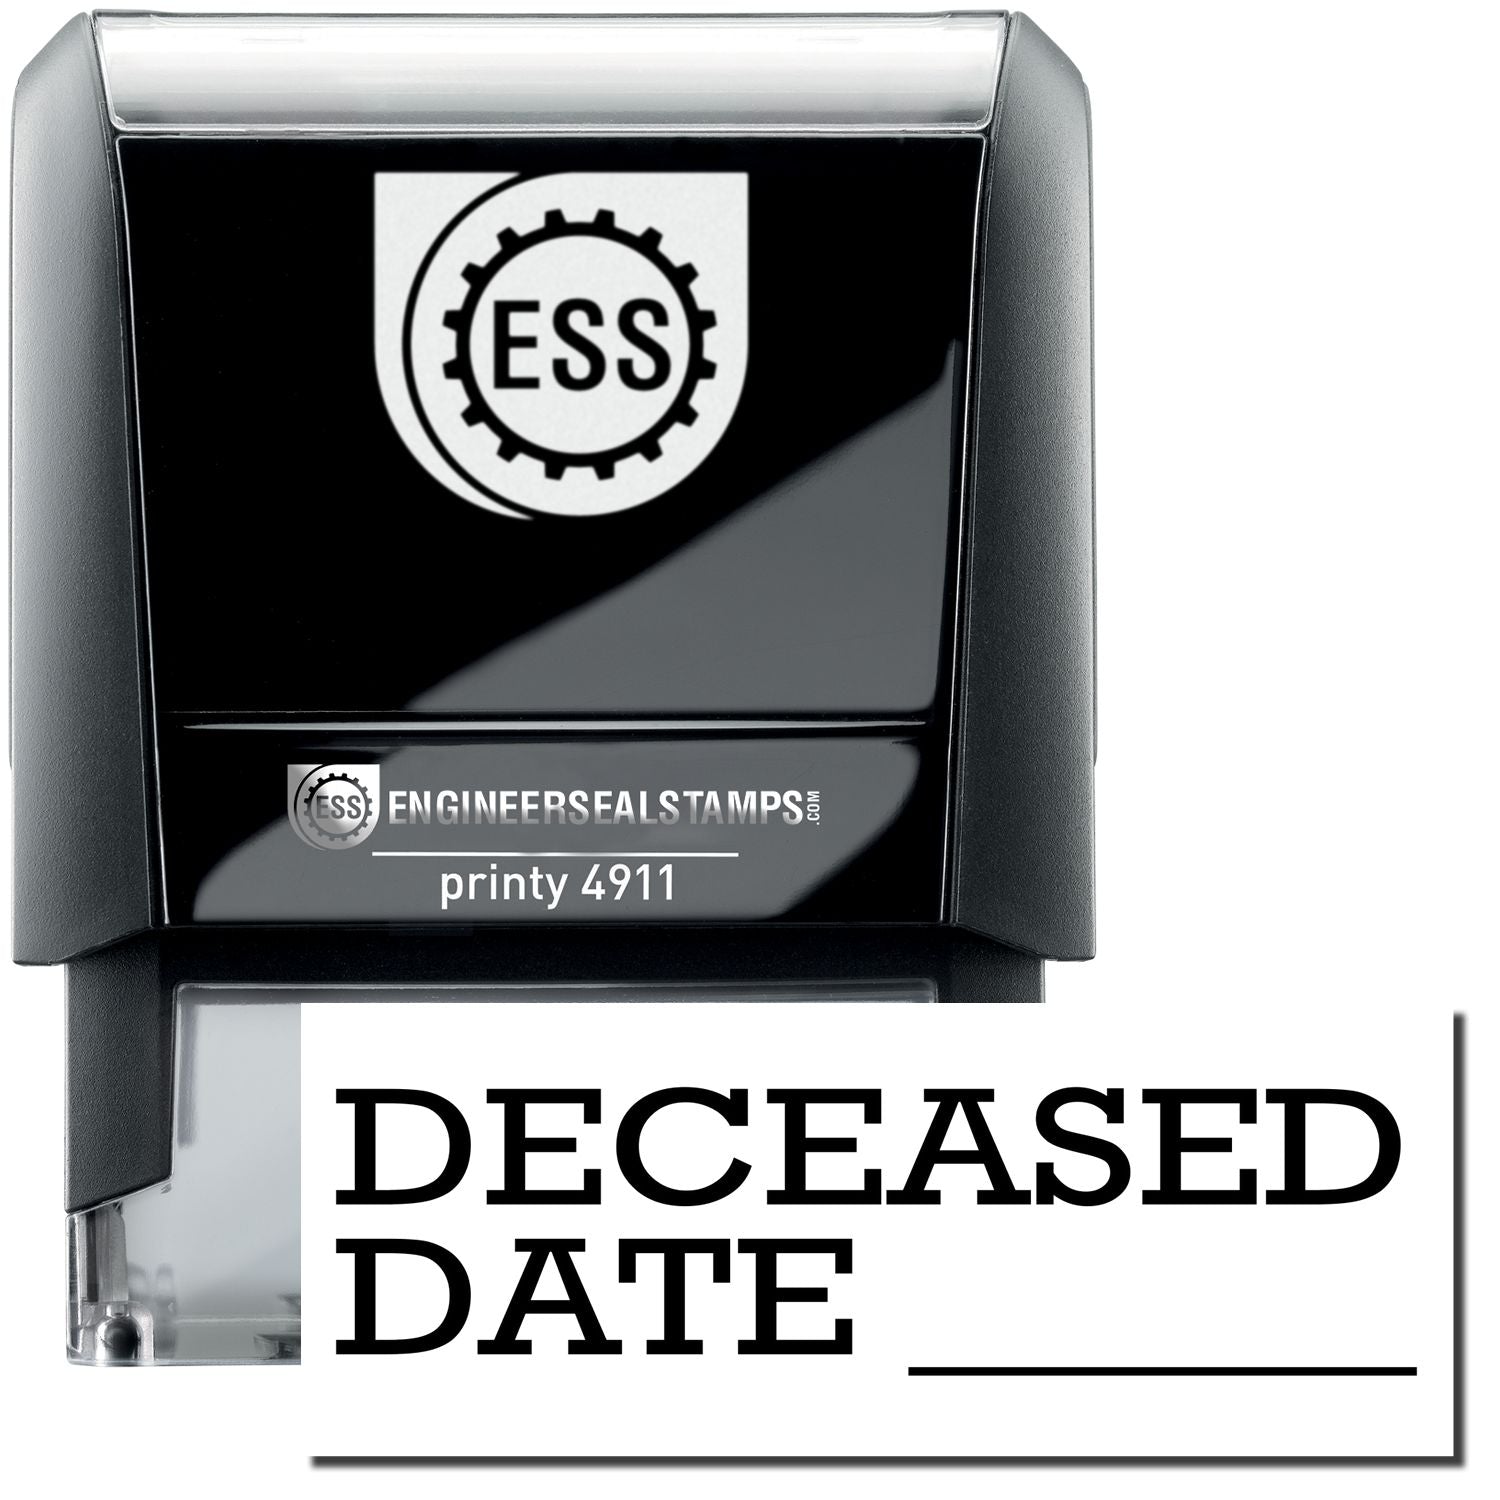 A self-inking stamp with a stamped image showing how the text "DECEASED DATE" with a line is displayed after stamping.